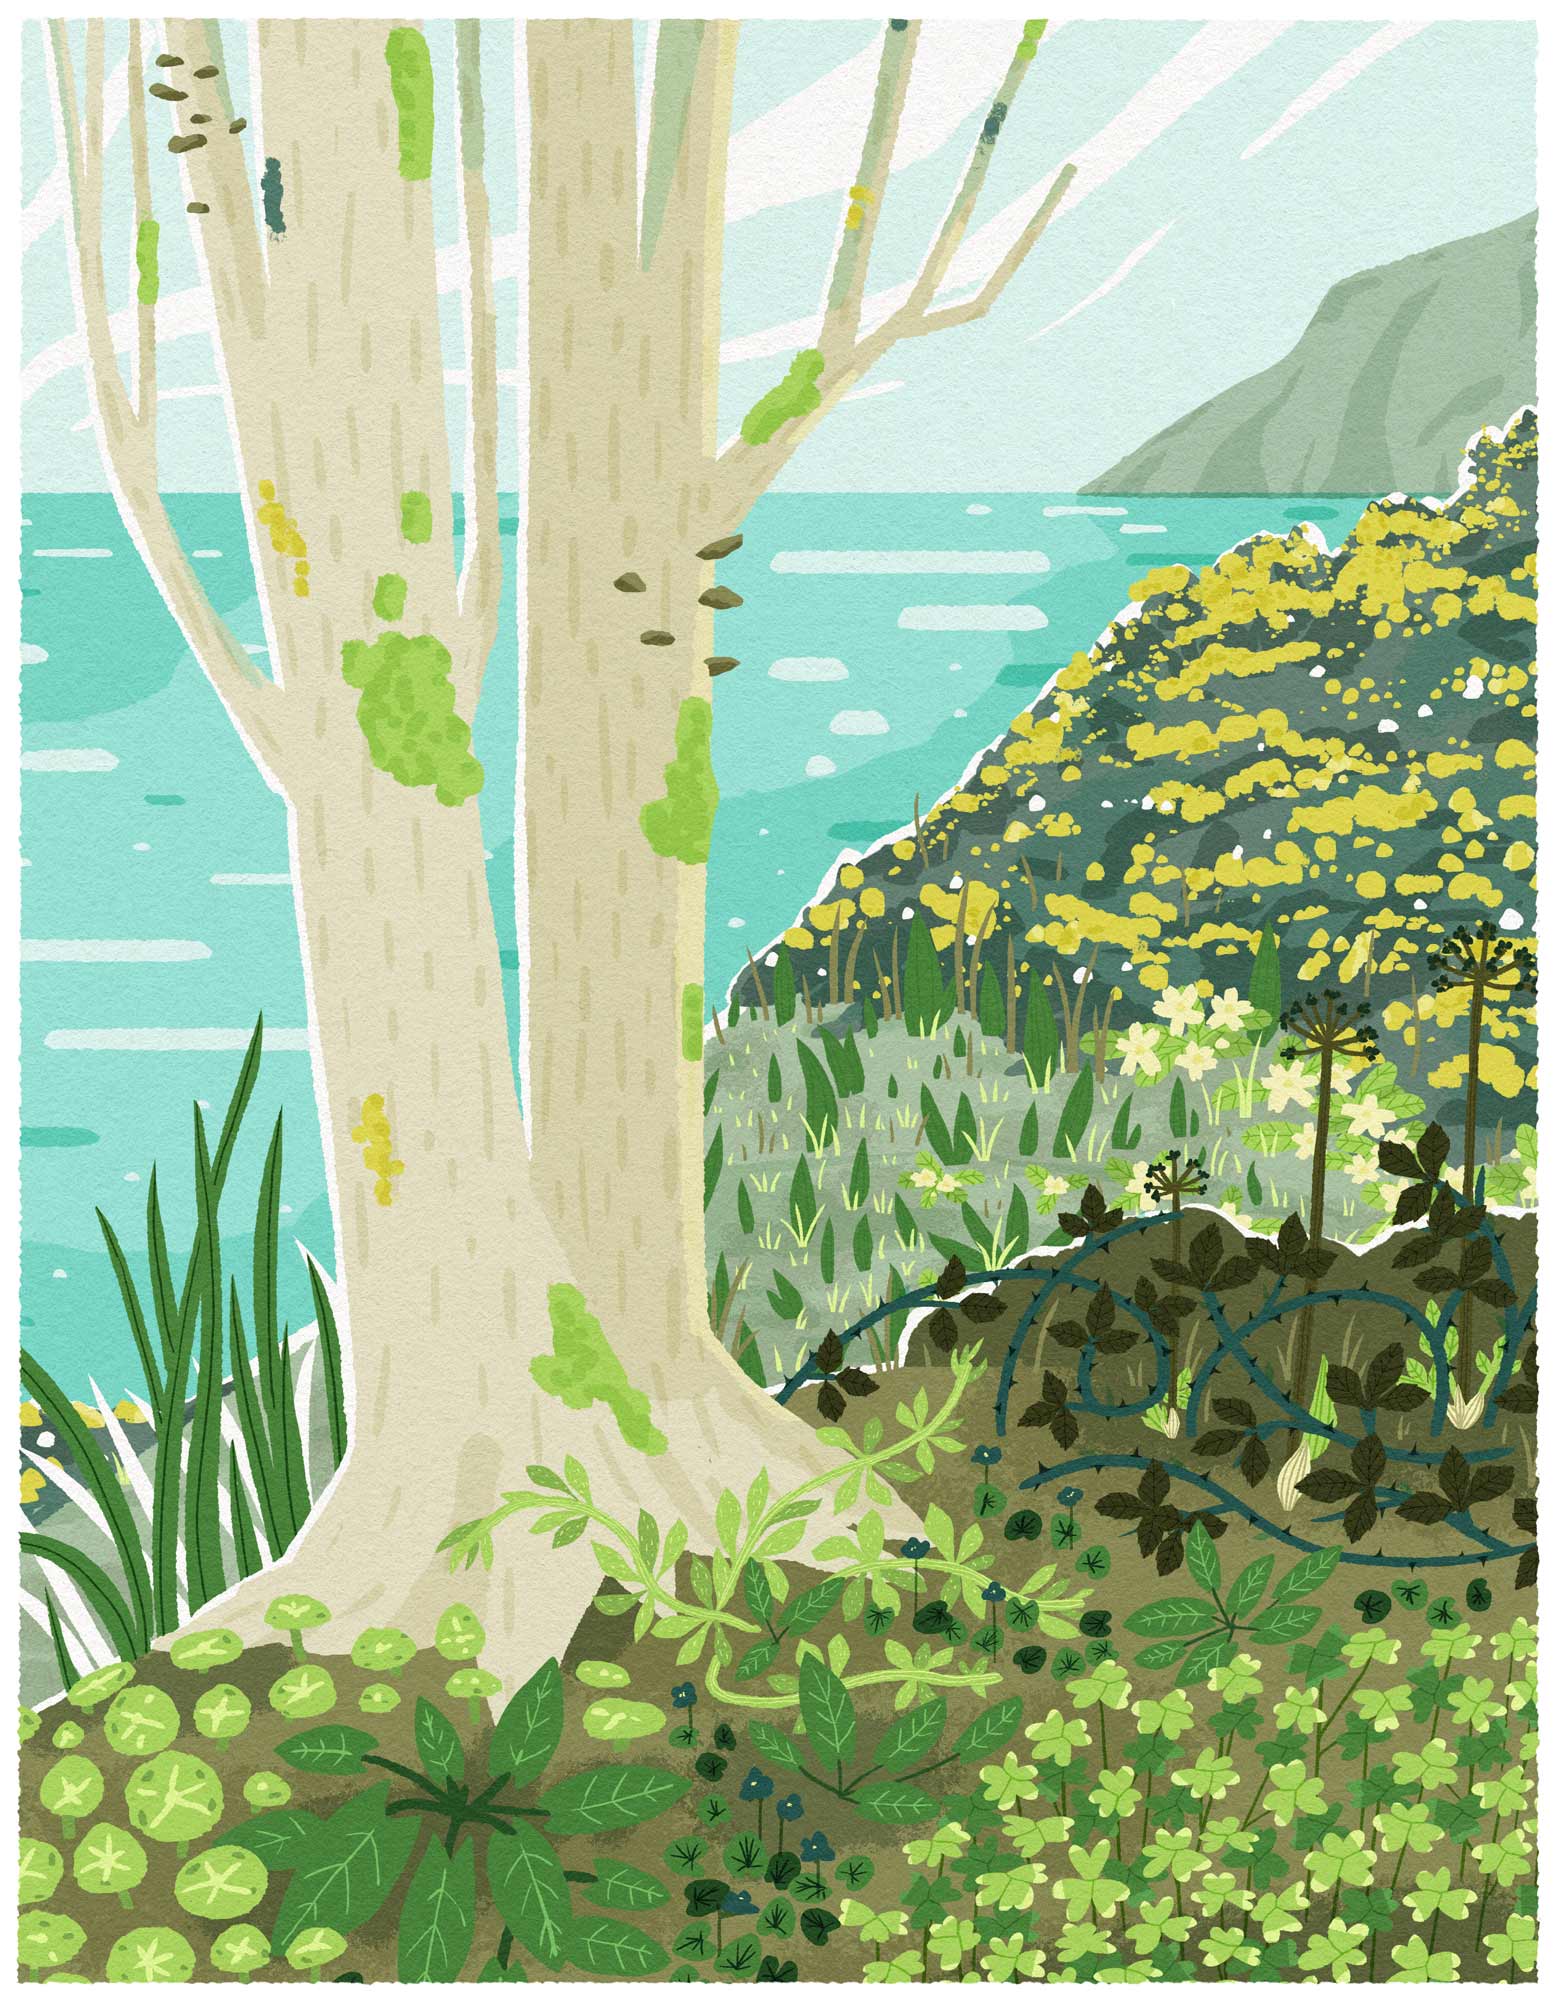 Illustration of a coastal woodland scene with edible forage plants by Elly Jahnz